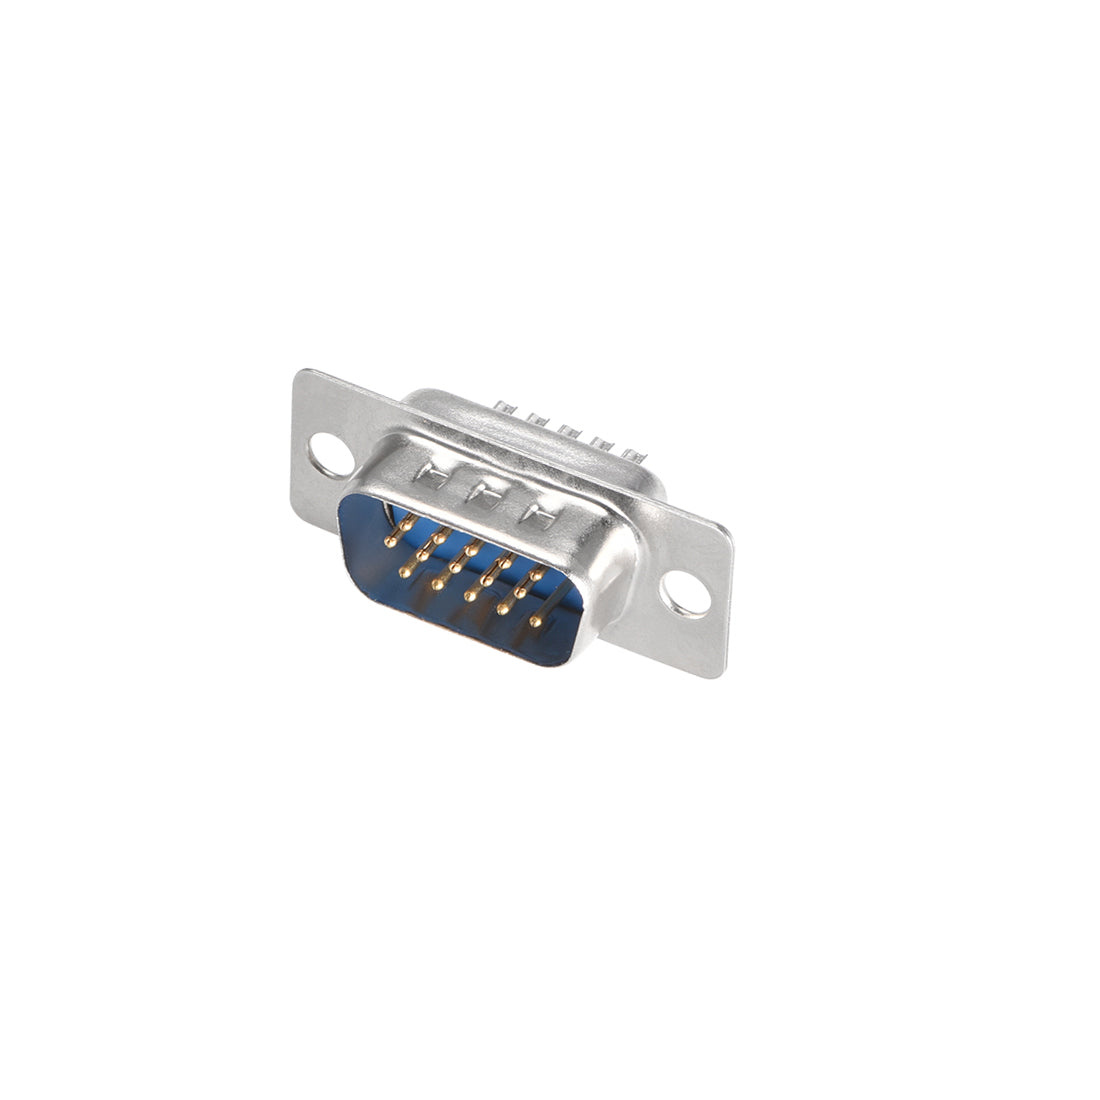 uxcell Uxcell D-sub Connector Male Plug 15-pin 3-row Port Terminal Breakout for Mechanical Equipment CNC Computers Blue 5pcs